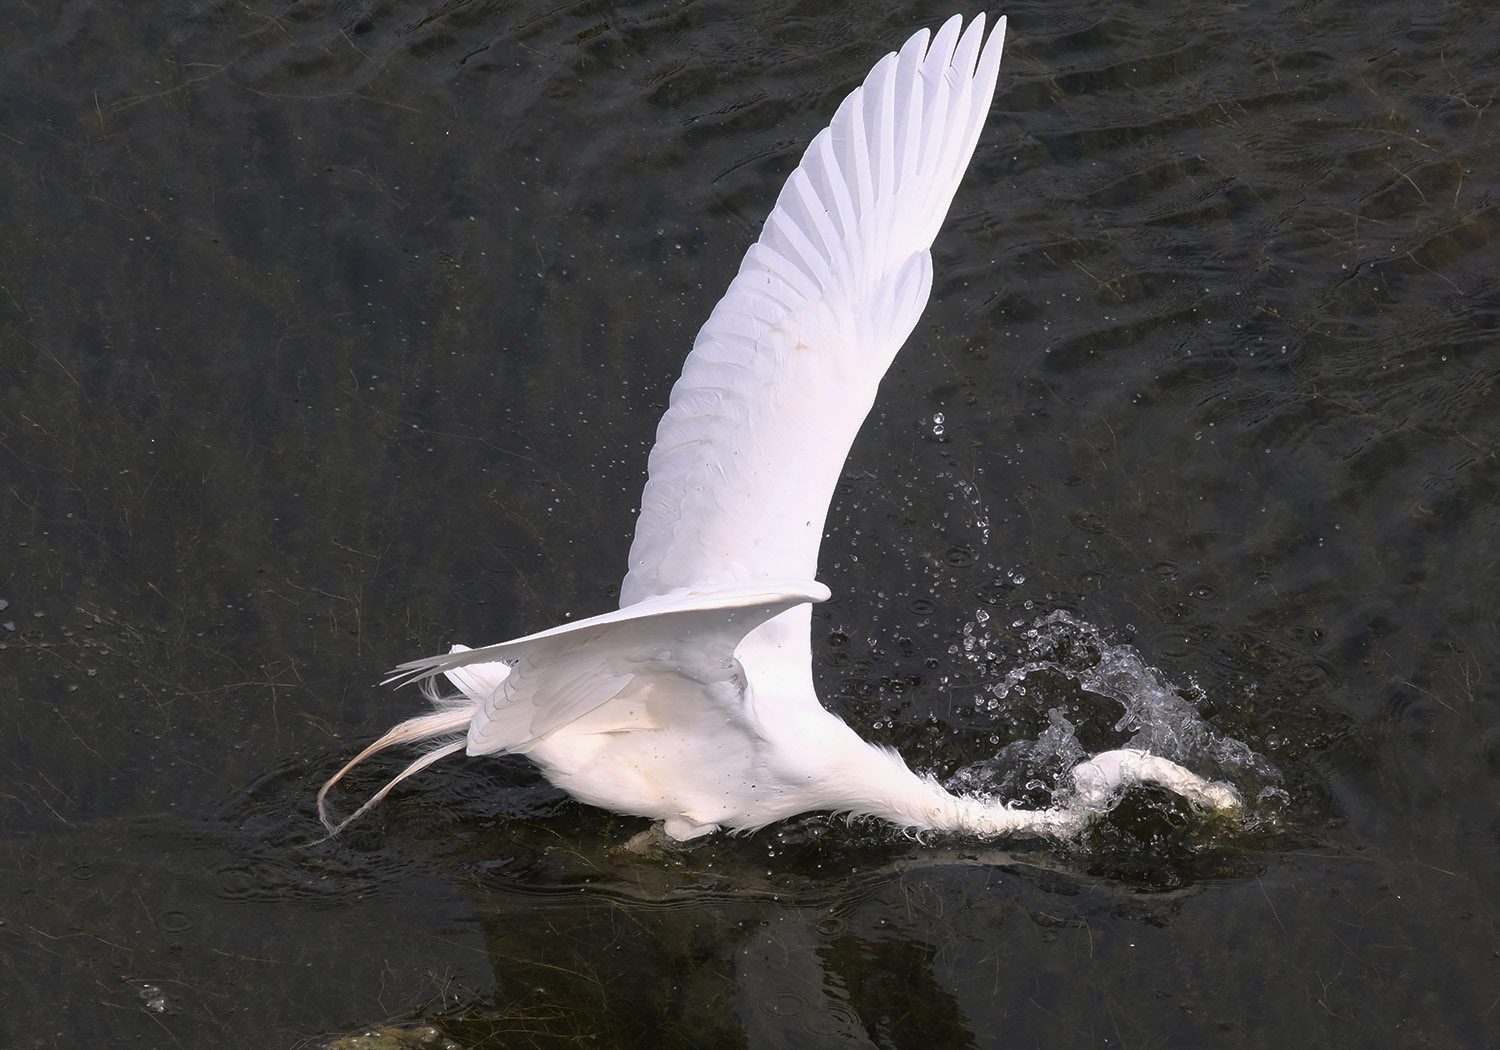 An egret plunging after a fish.